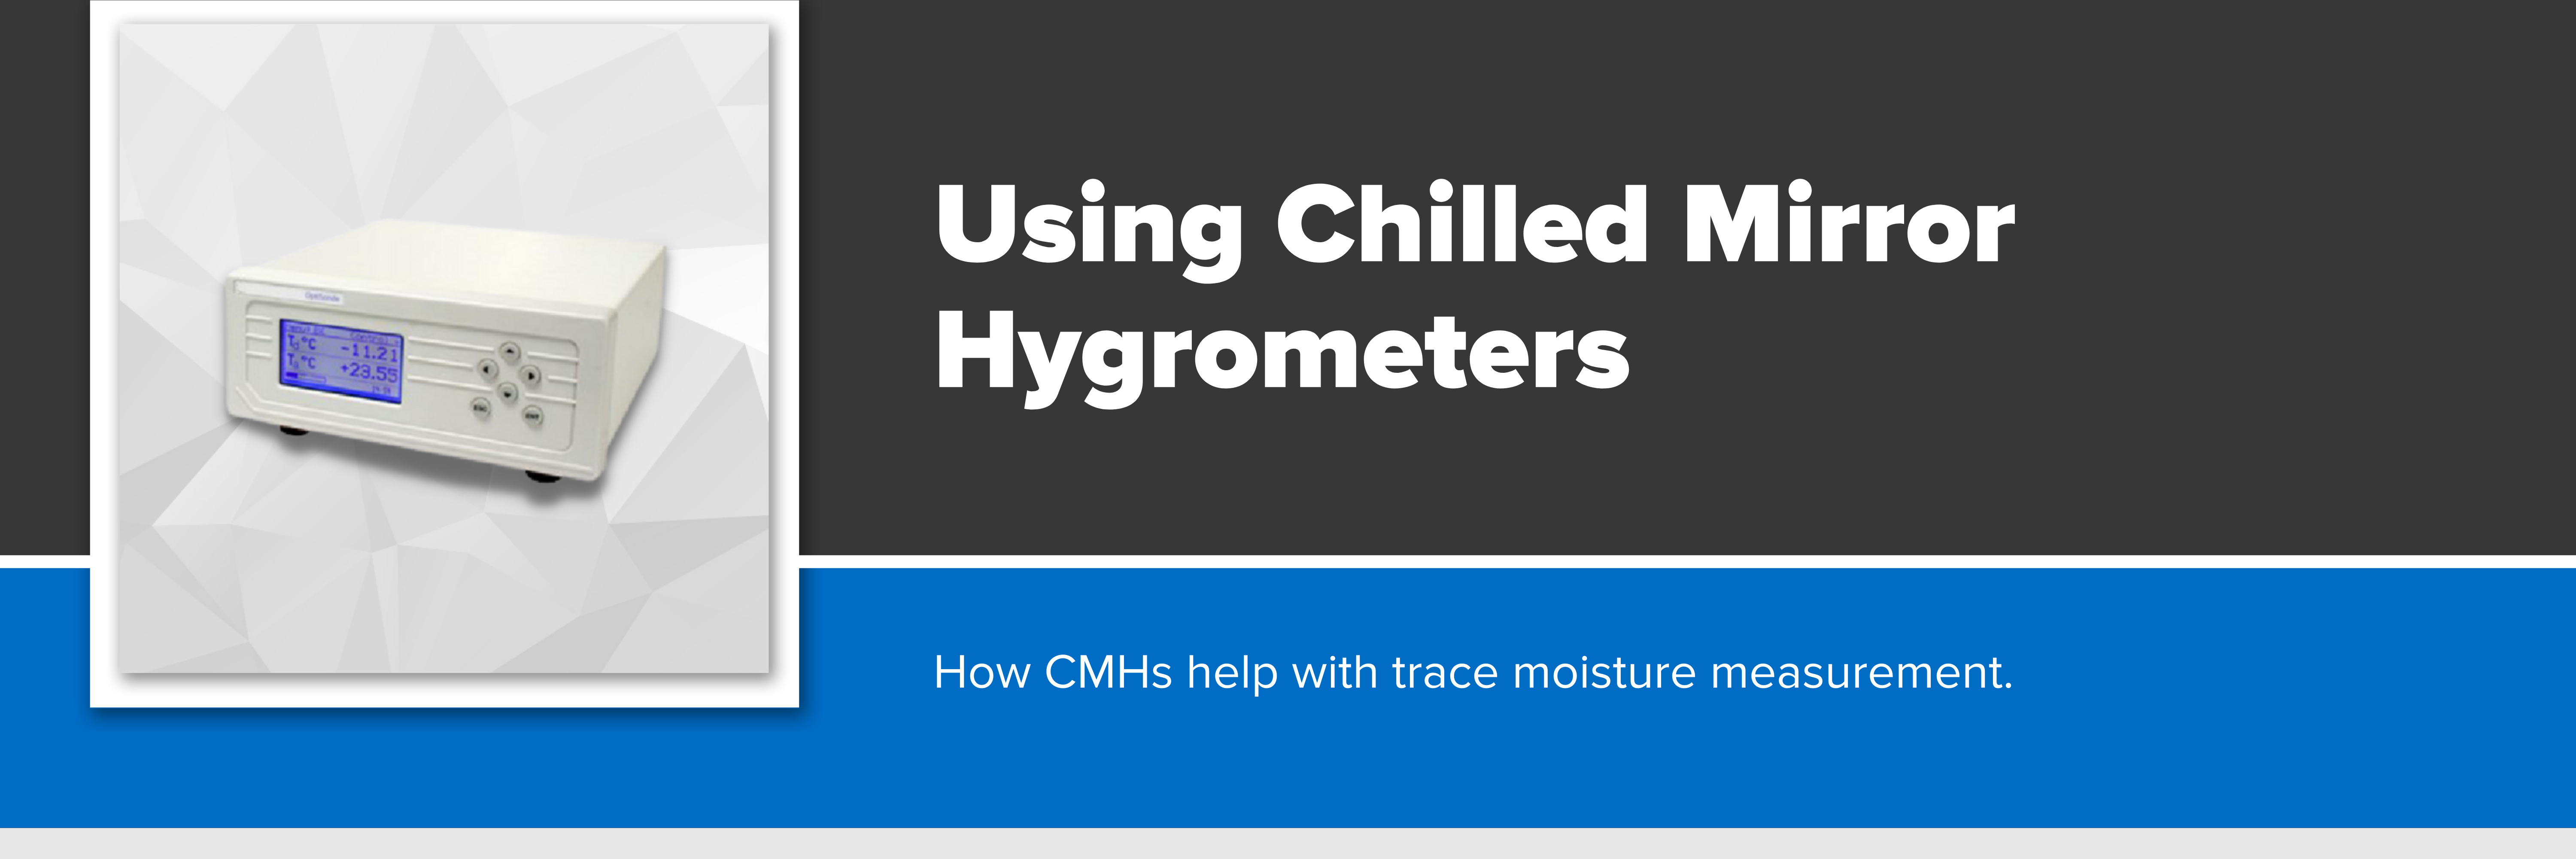 Header image with text "Using Chilled Mirror Hygrometers for Trace Moisture"